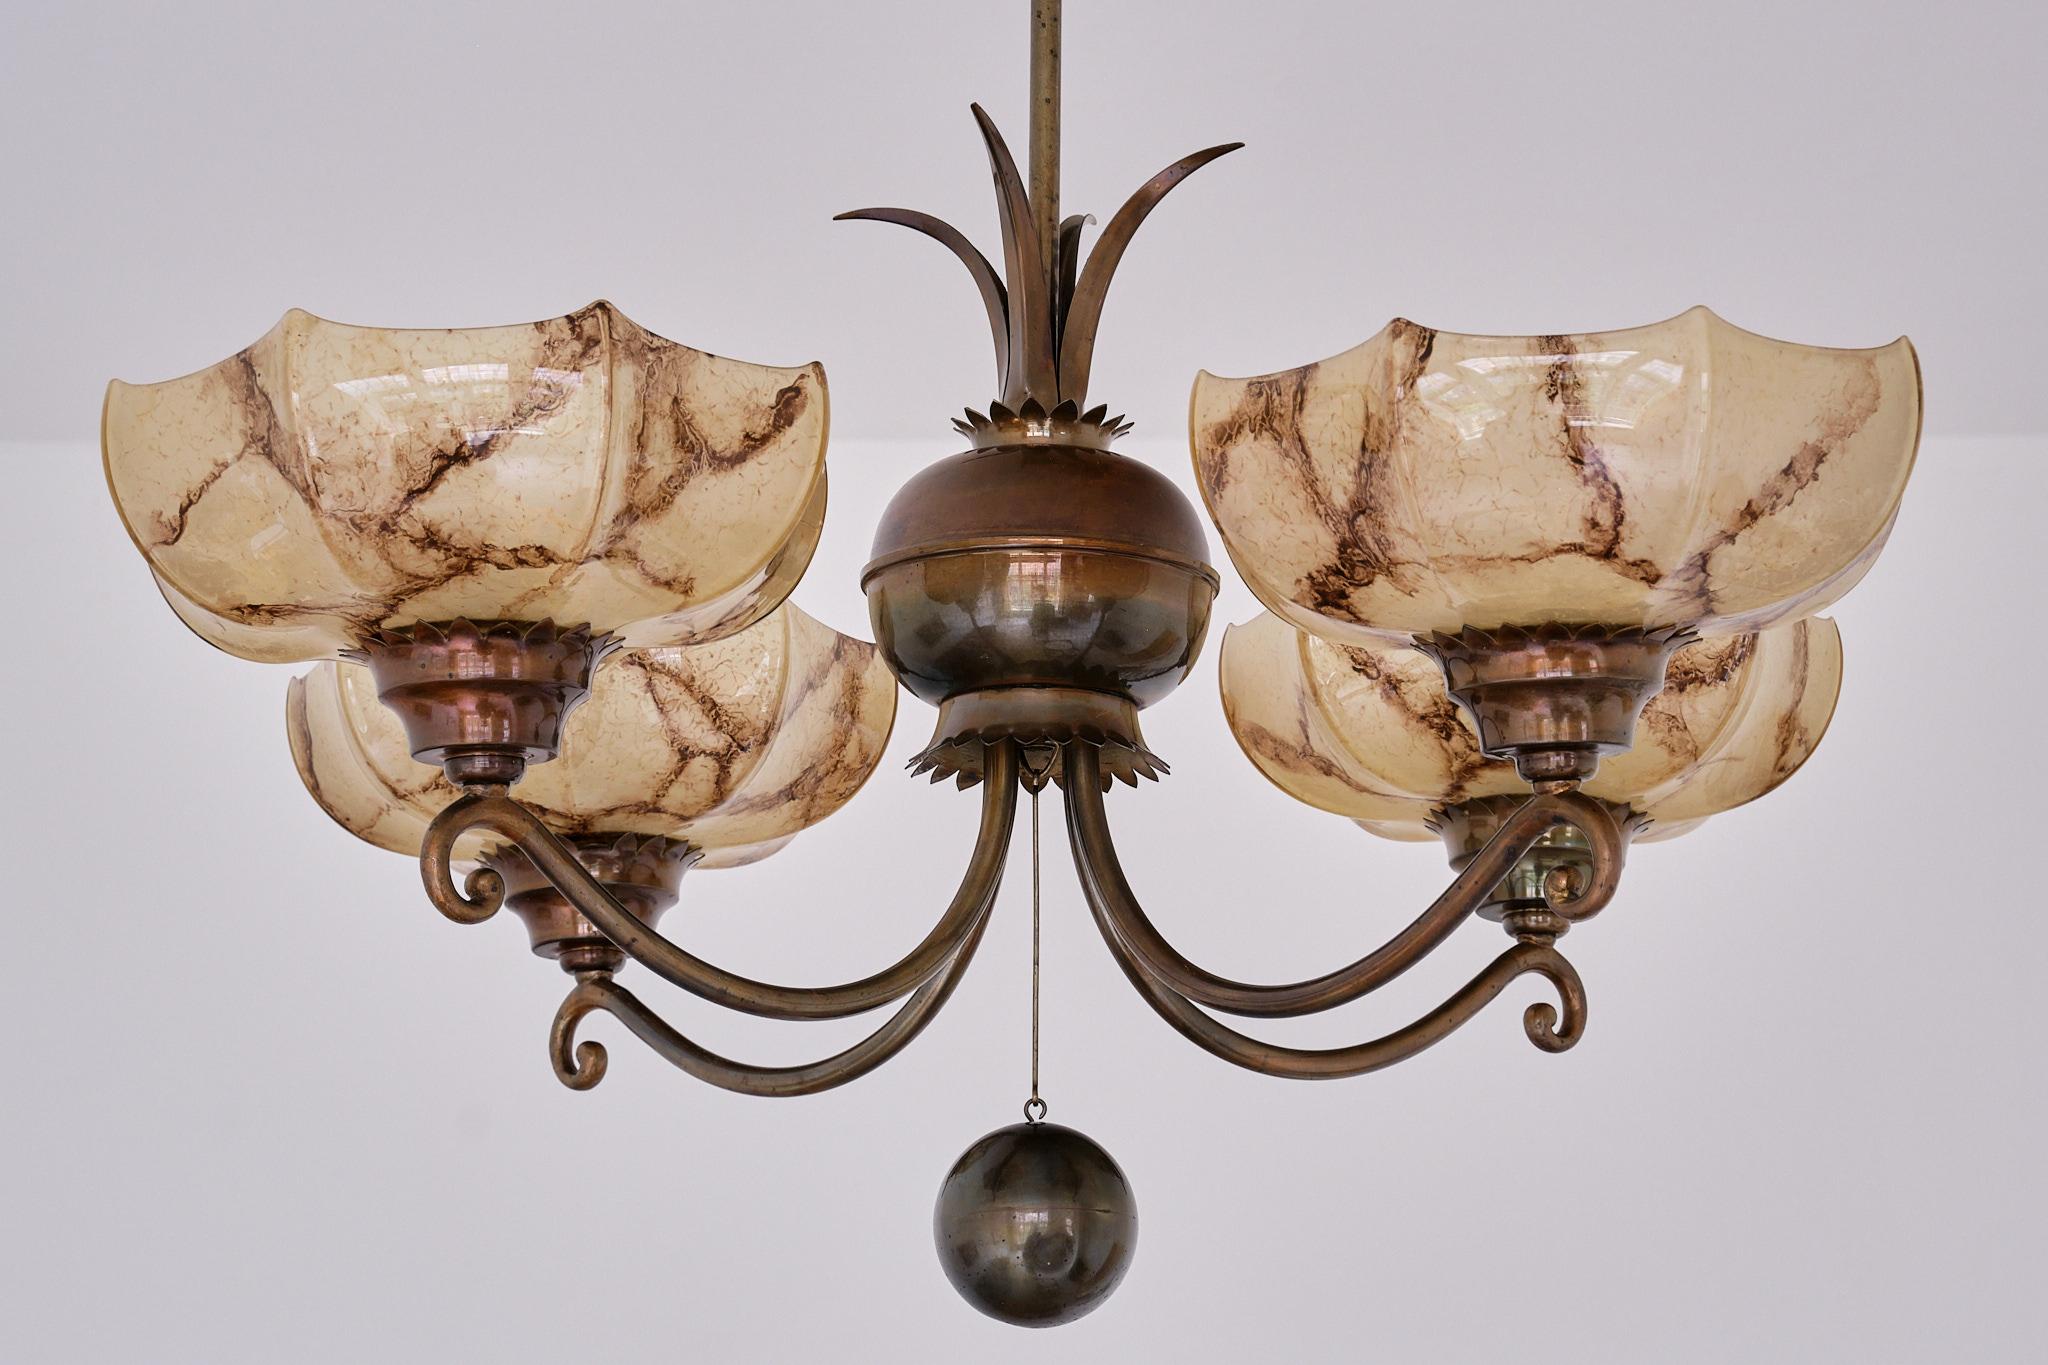 Harald Notini Chandelier in Brass and Marbled Glass, Böhlmarks, Sweden, 1927 For Sale 4